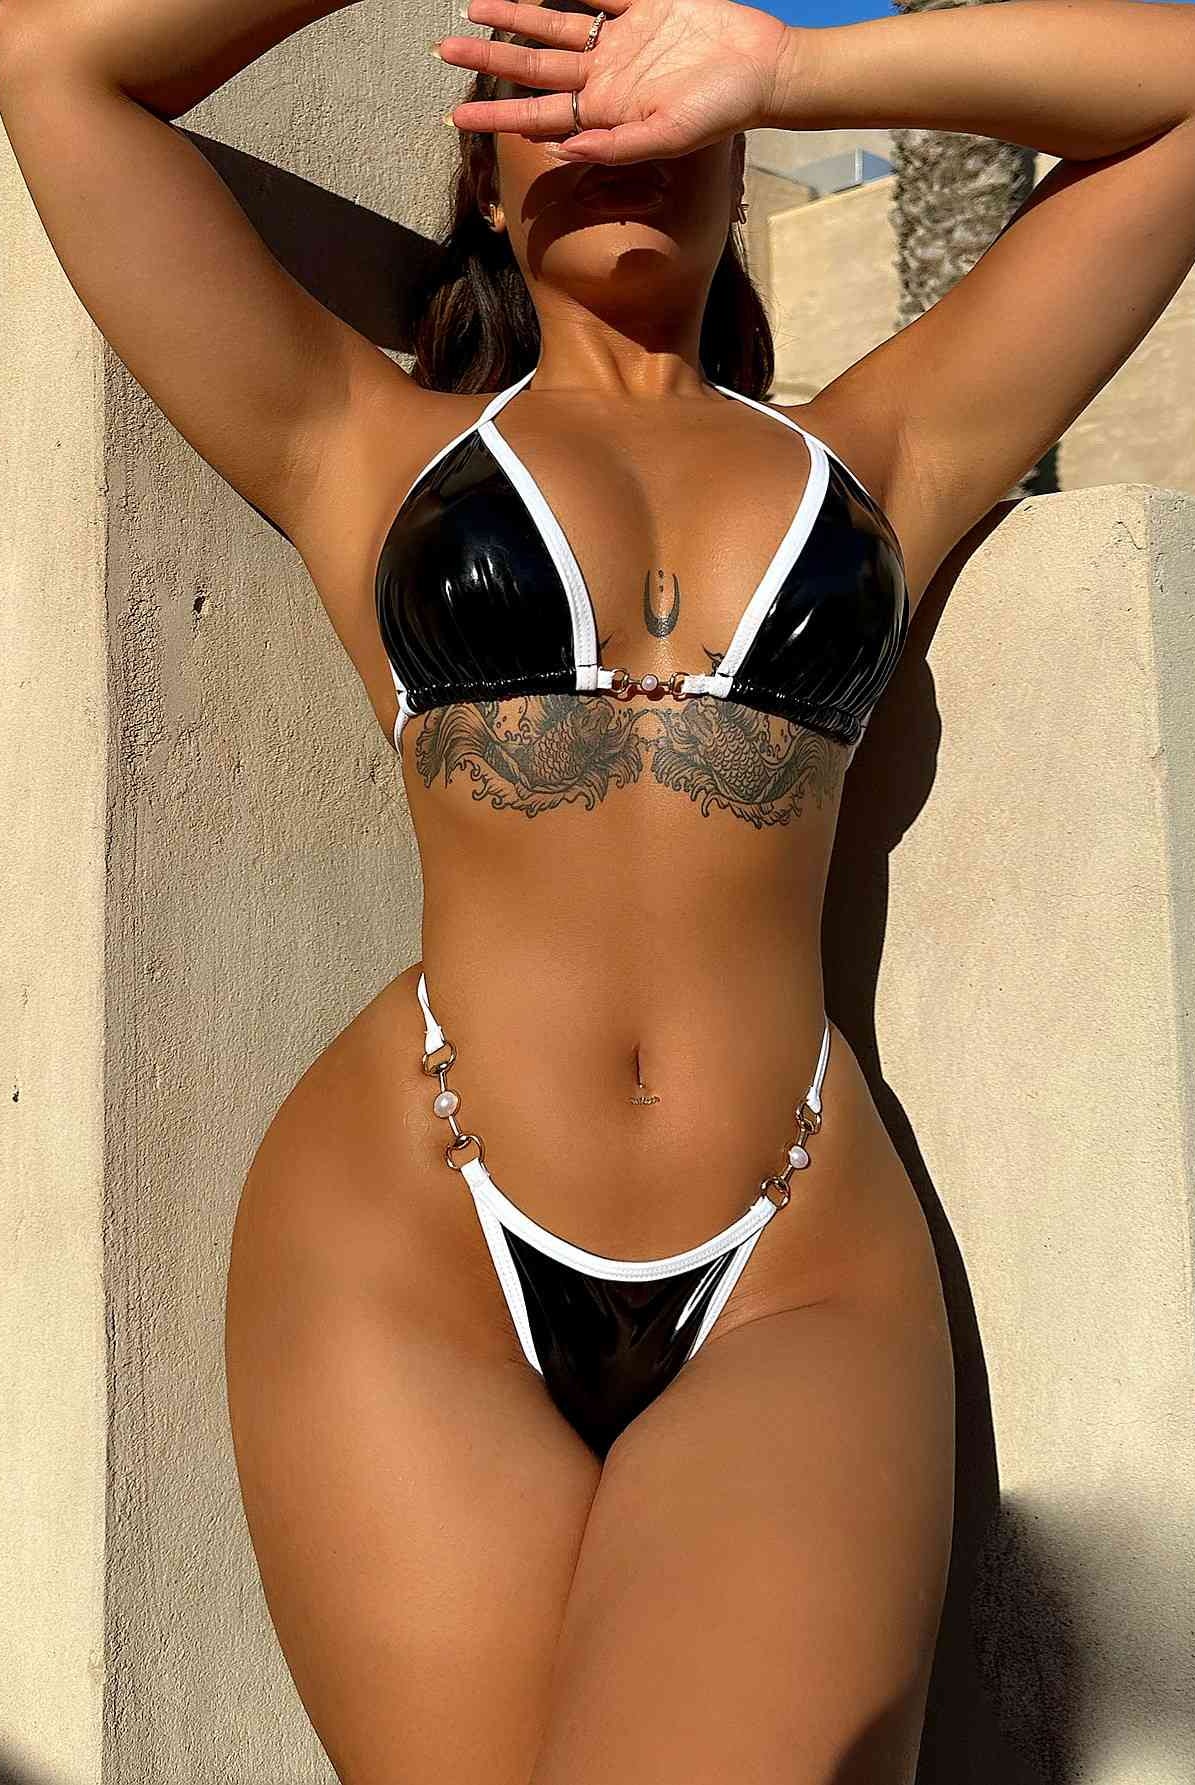 Woman posing in a black and white halter neck bikini set with metallic accents and ring details, against a warm, sunlit wall.